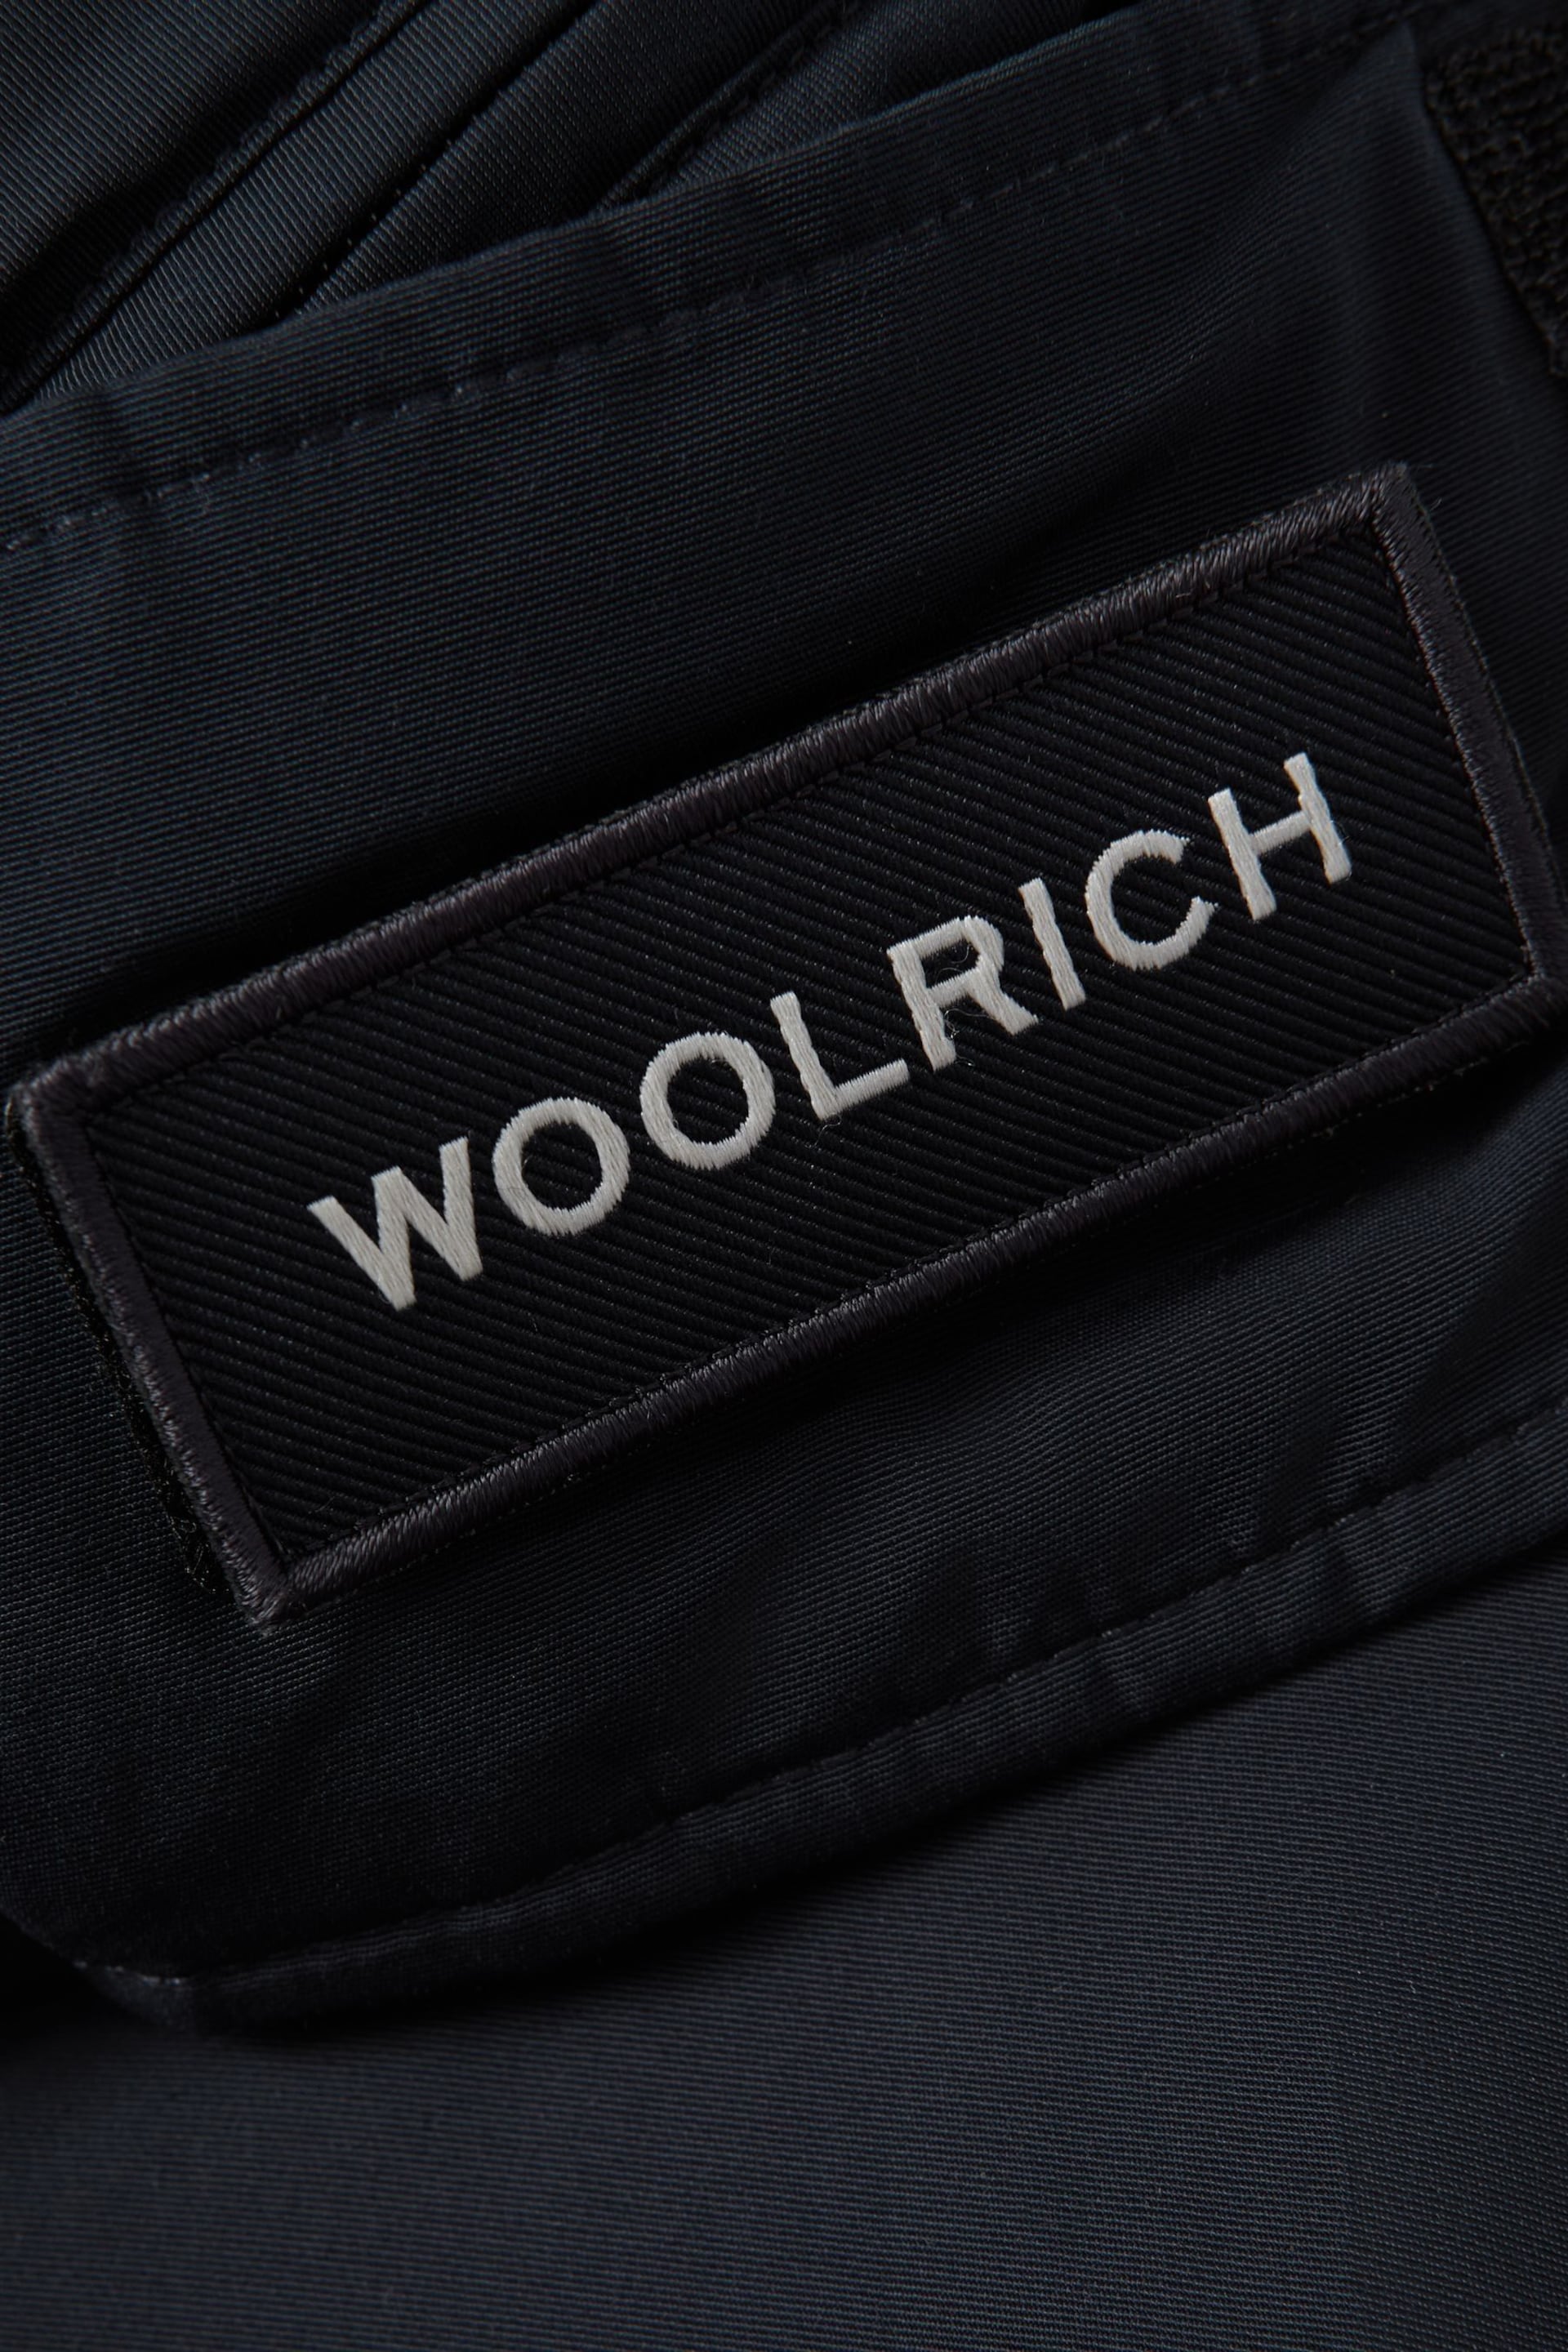 Woolrich Hooded Parka Coat - Image 8 of 8